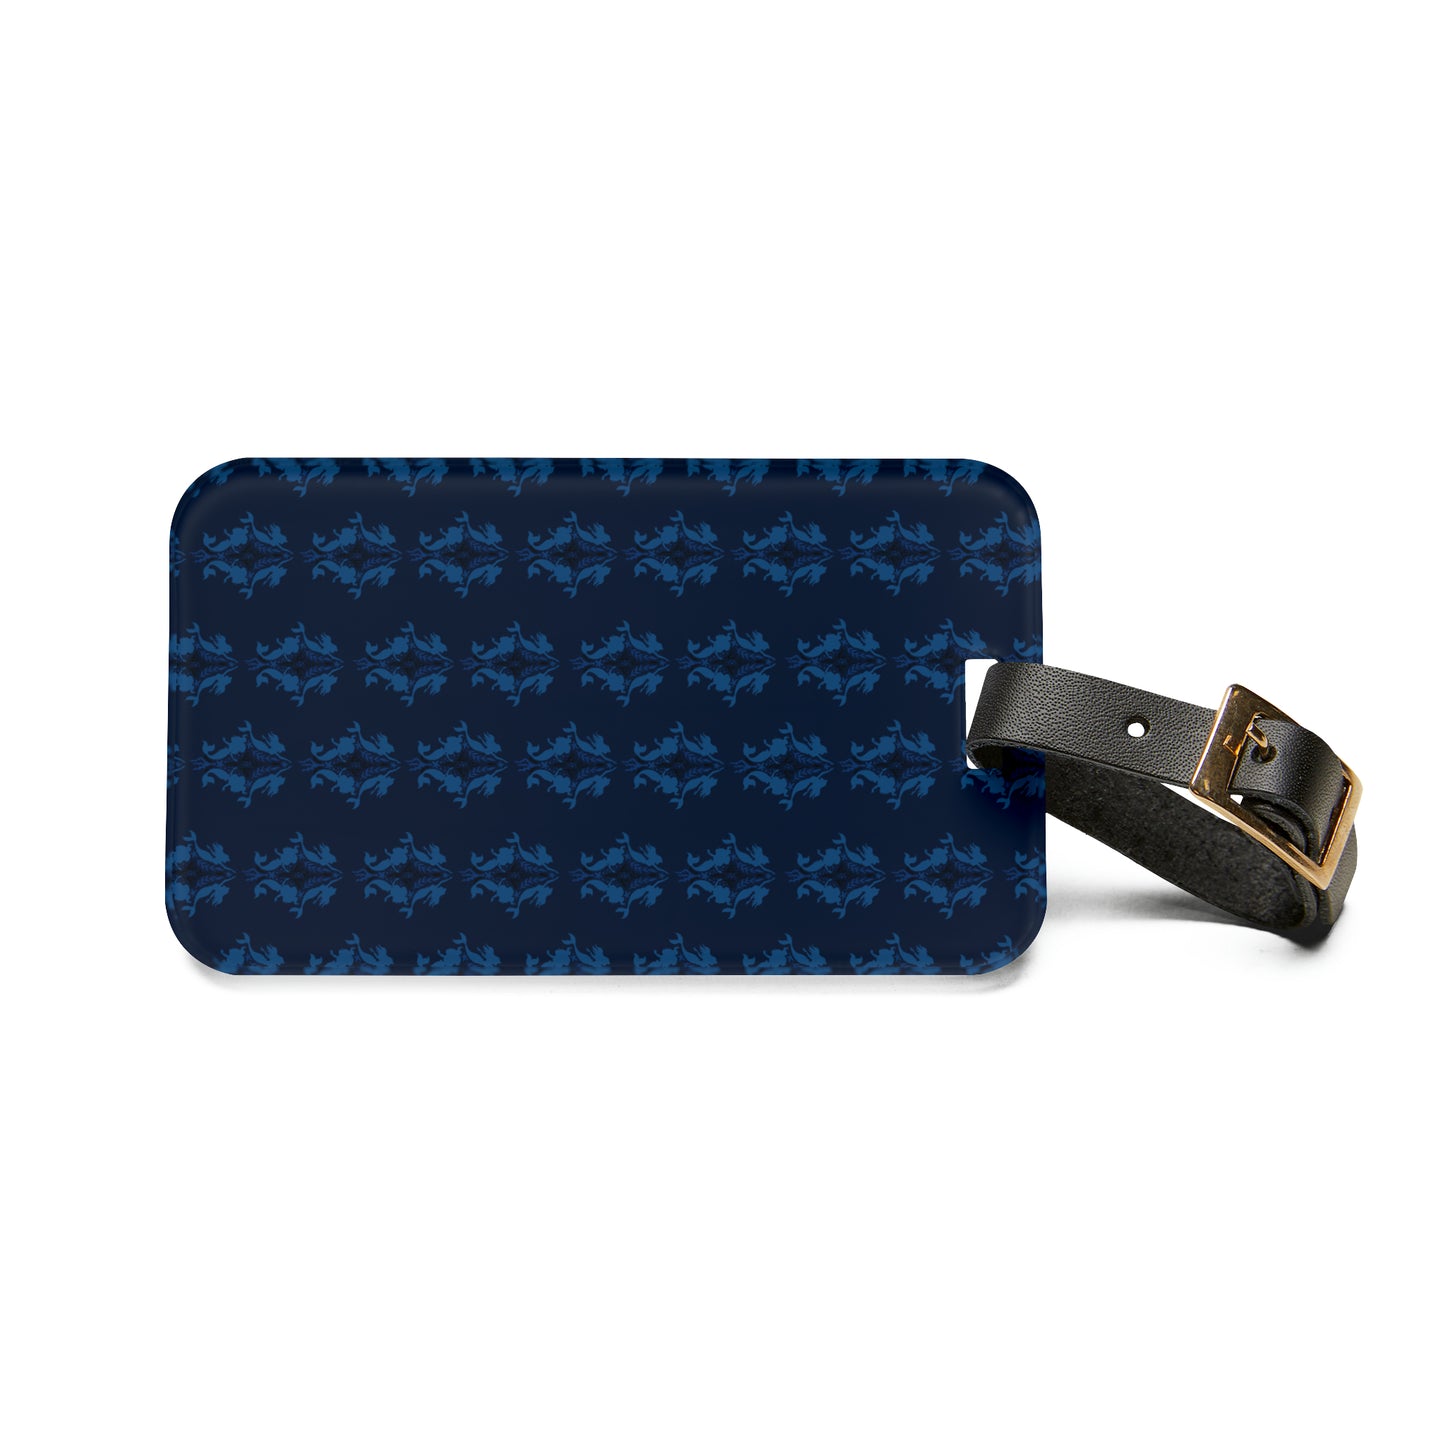 Under The Sea Luggage Tag